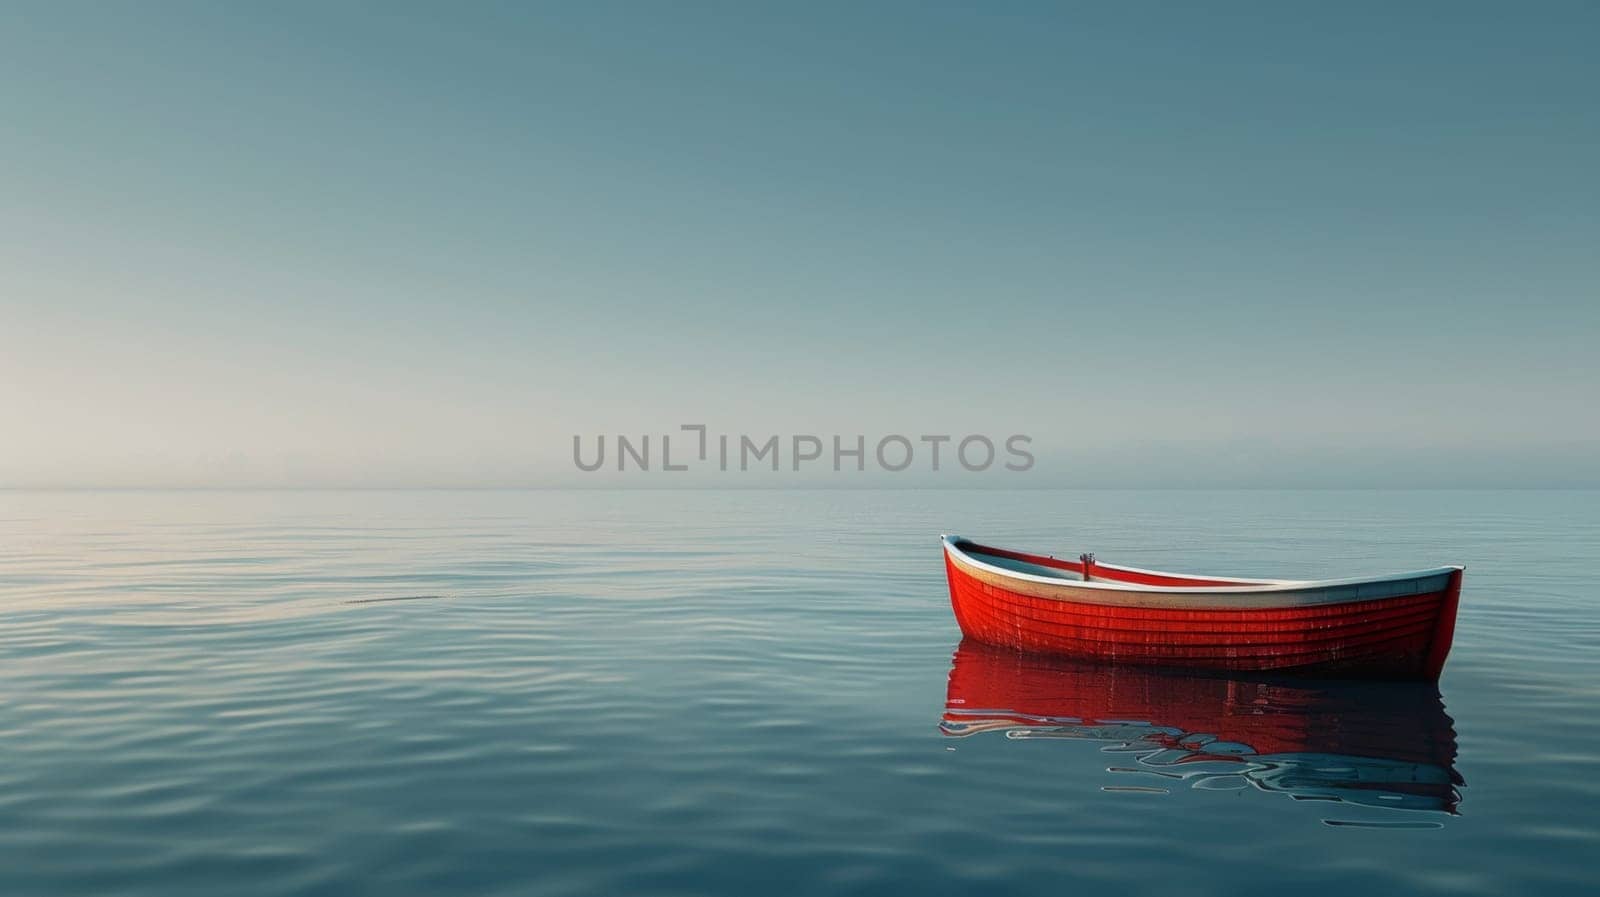 A small boat floating in the middle of a large body of water